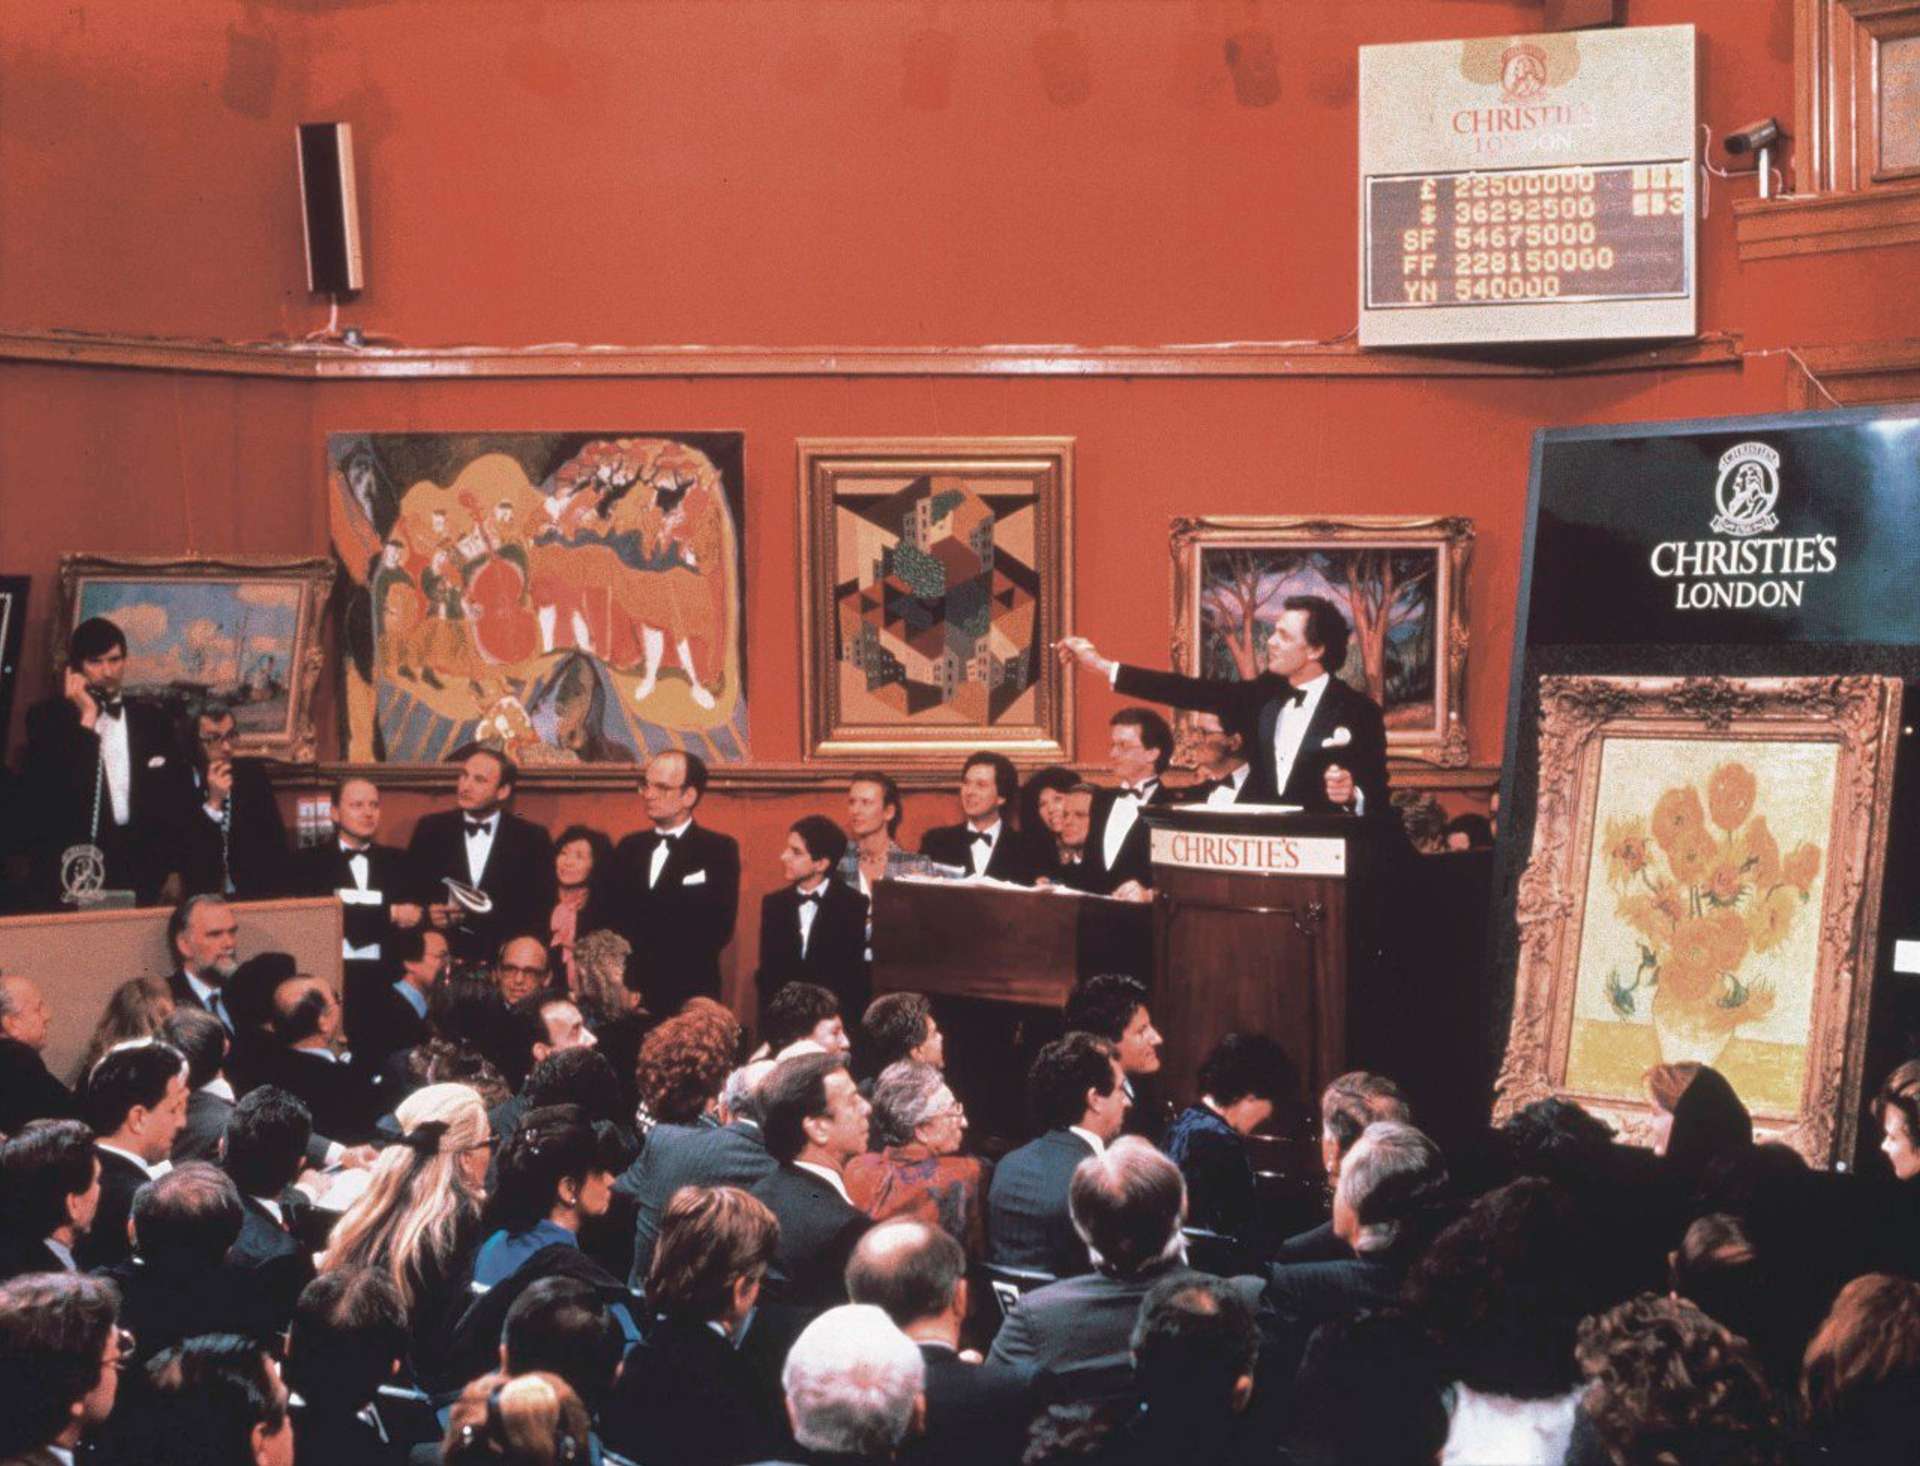 Image © Christie's / Christie's London 1987 - record breaking sale of Van Gogh's Sunflowers for £22.5million